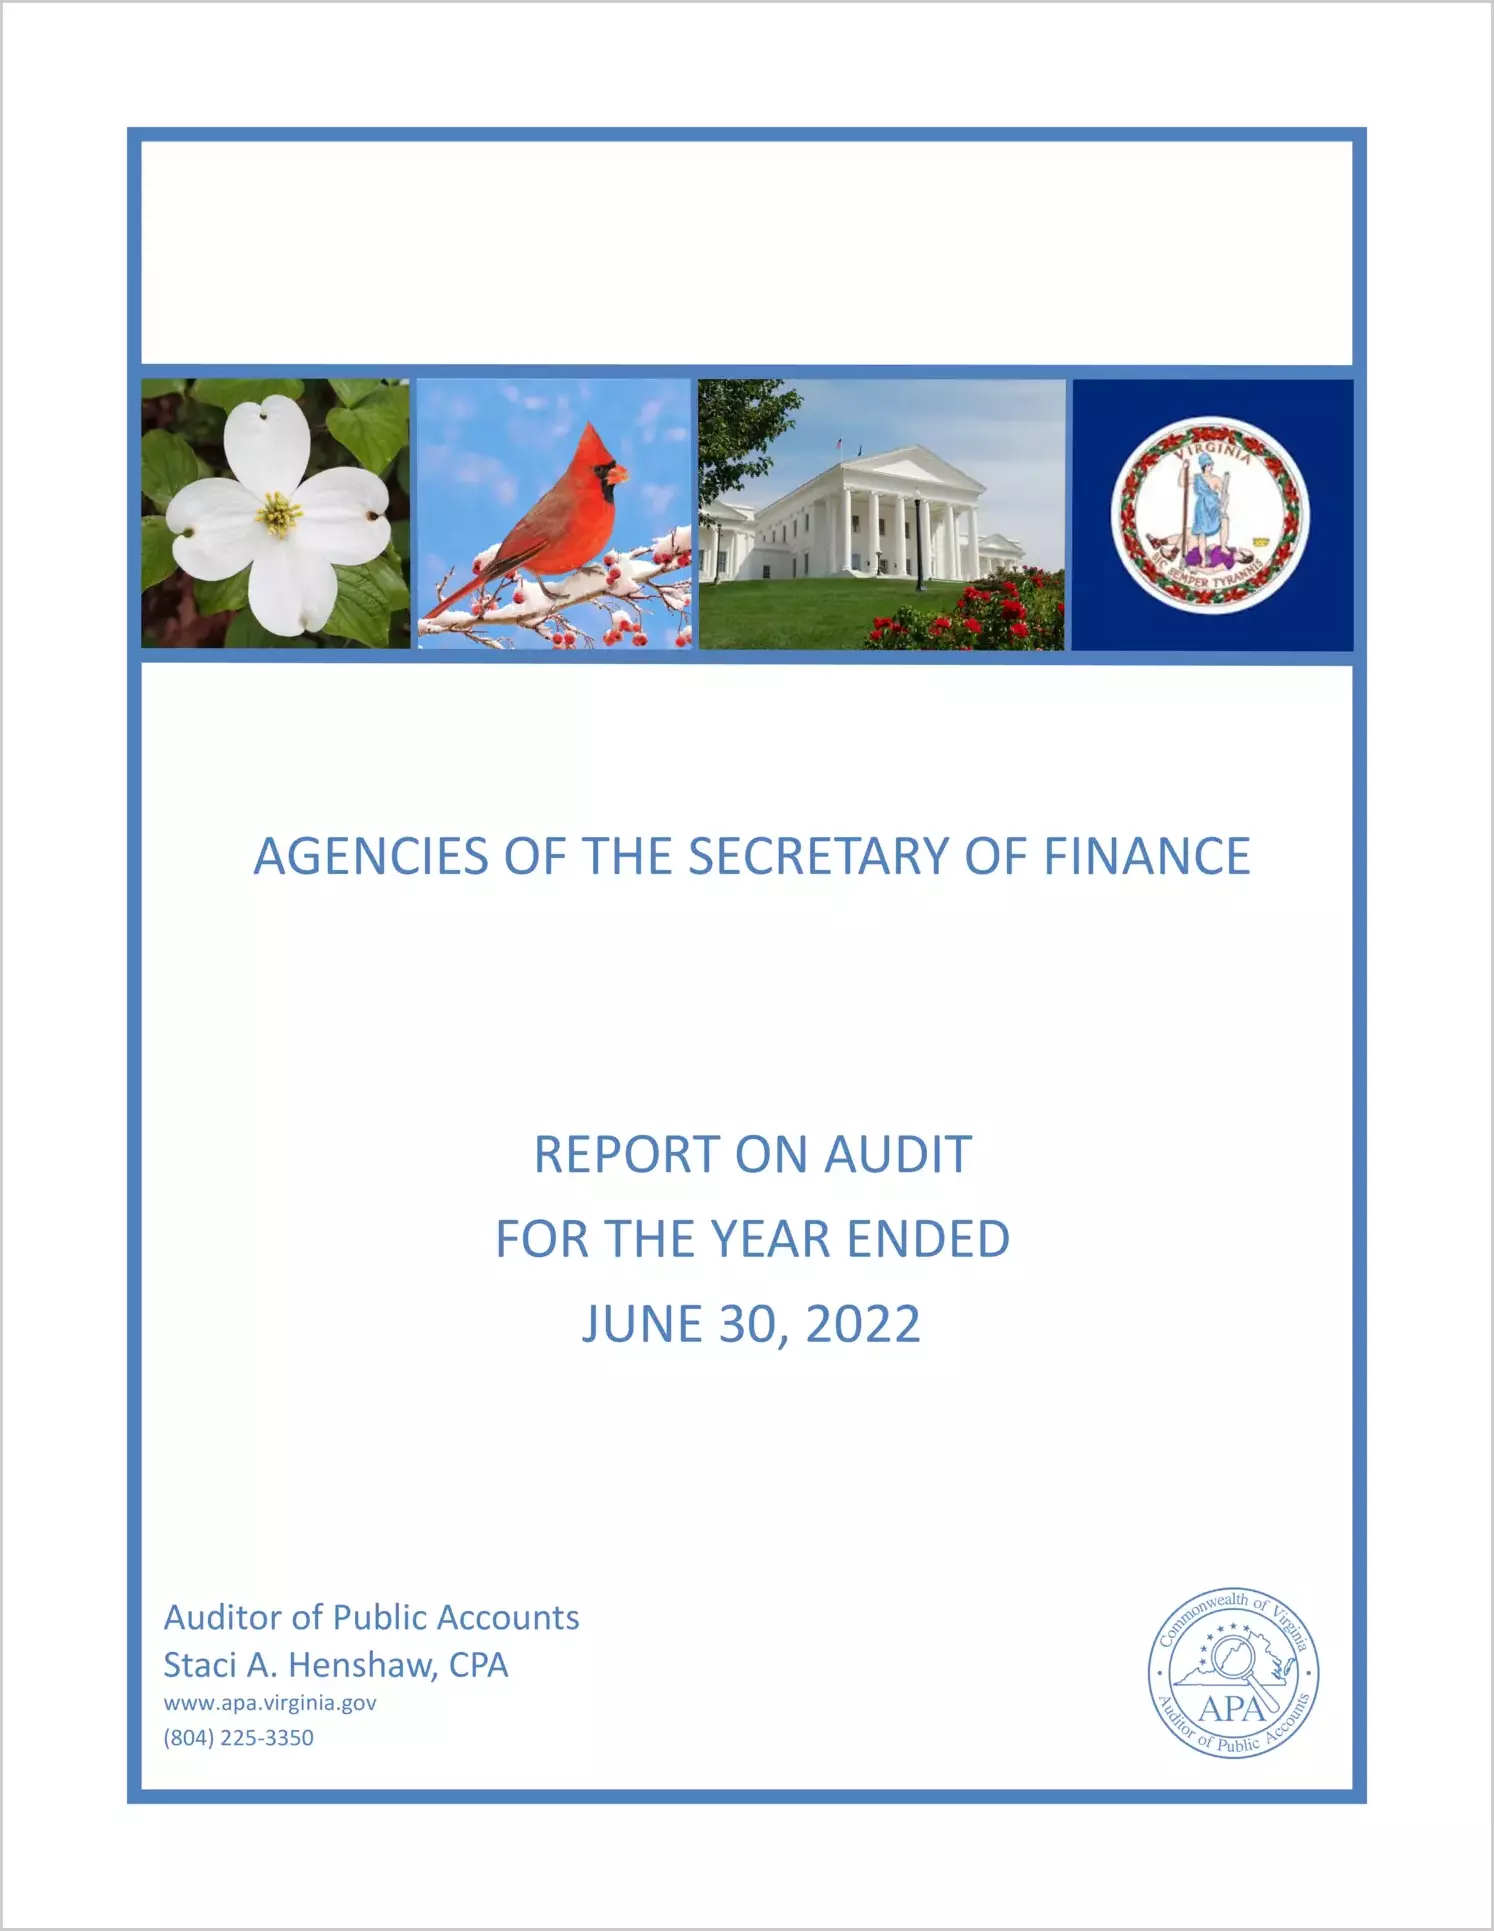 Agencies of the Secretary of Finance for the year ended June 30, 2022